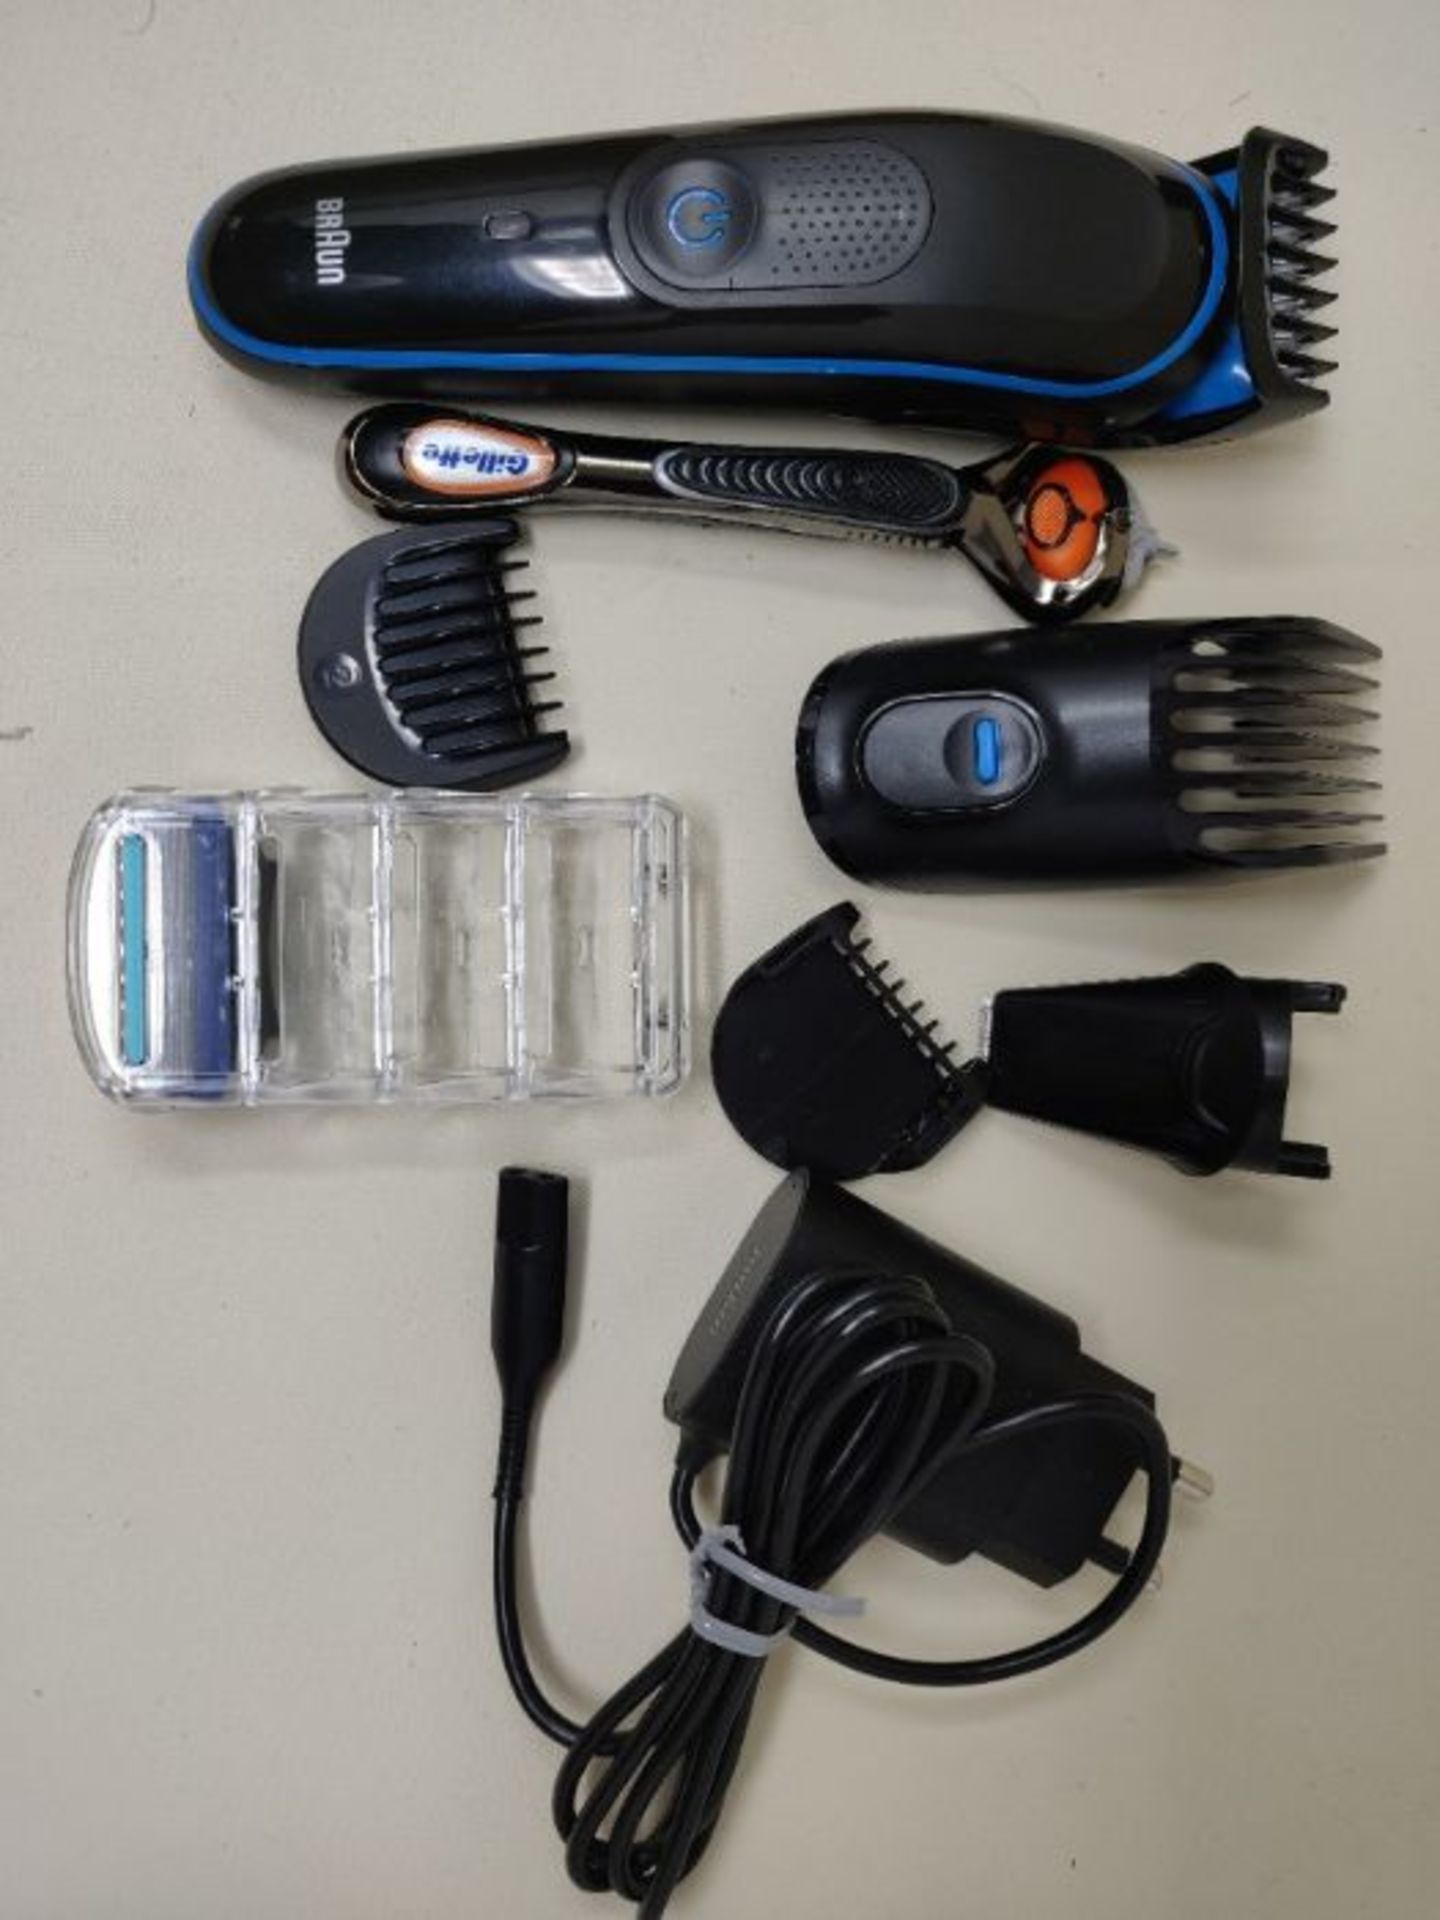 Braun 7-in-1 All-in-one Trimmer 3 MGK3245, Beard Trimmer for Men, Hair Clipper and Fac - Image 3 of 3